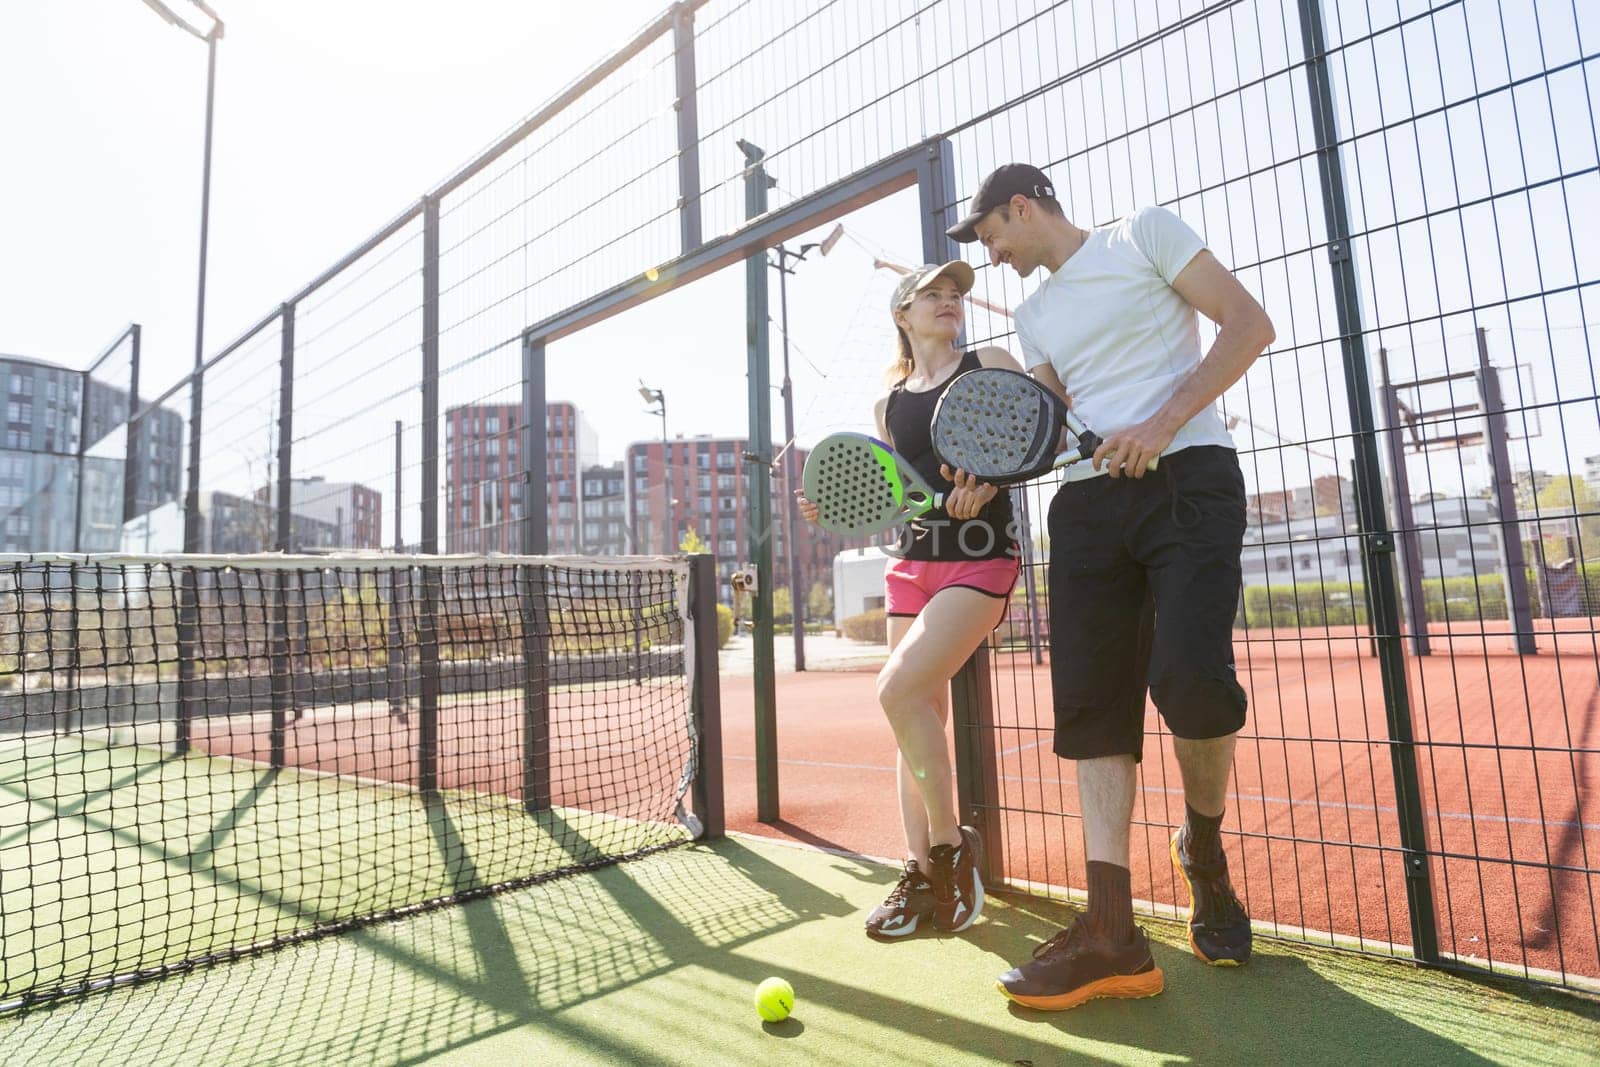 Cheerful athletic couple laughing during padel tennis match on outdoor court. High quality photo